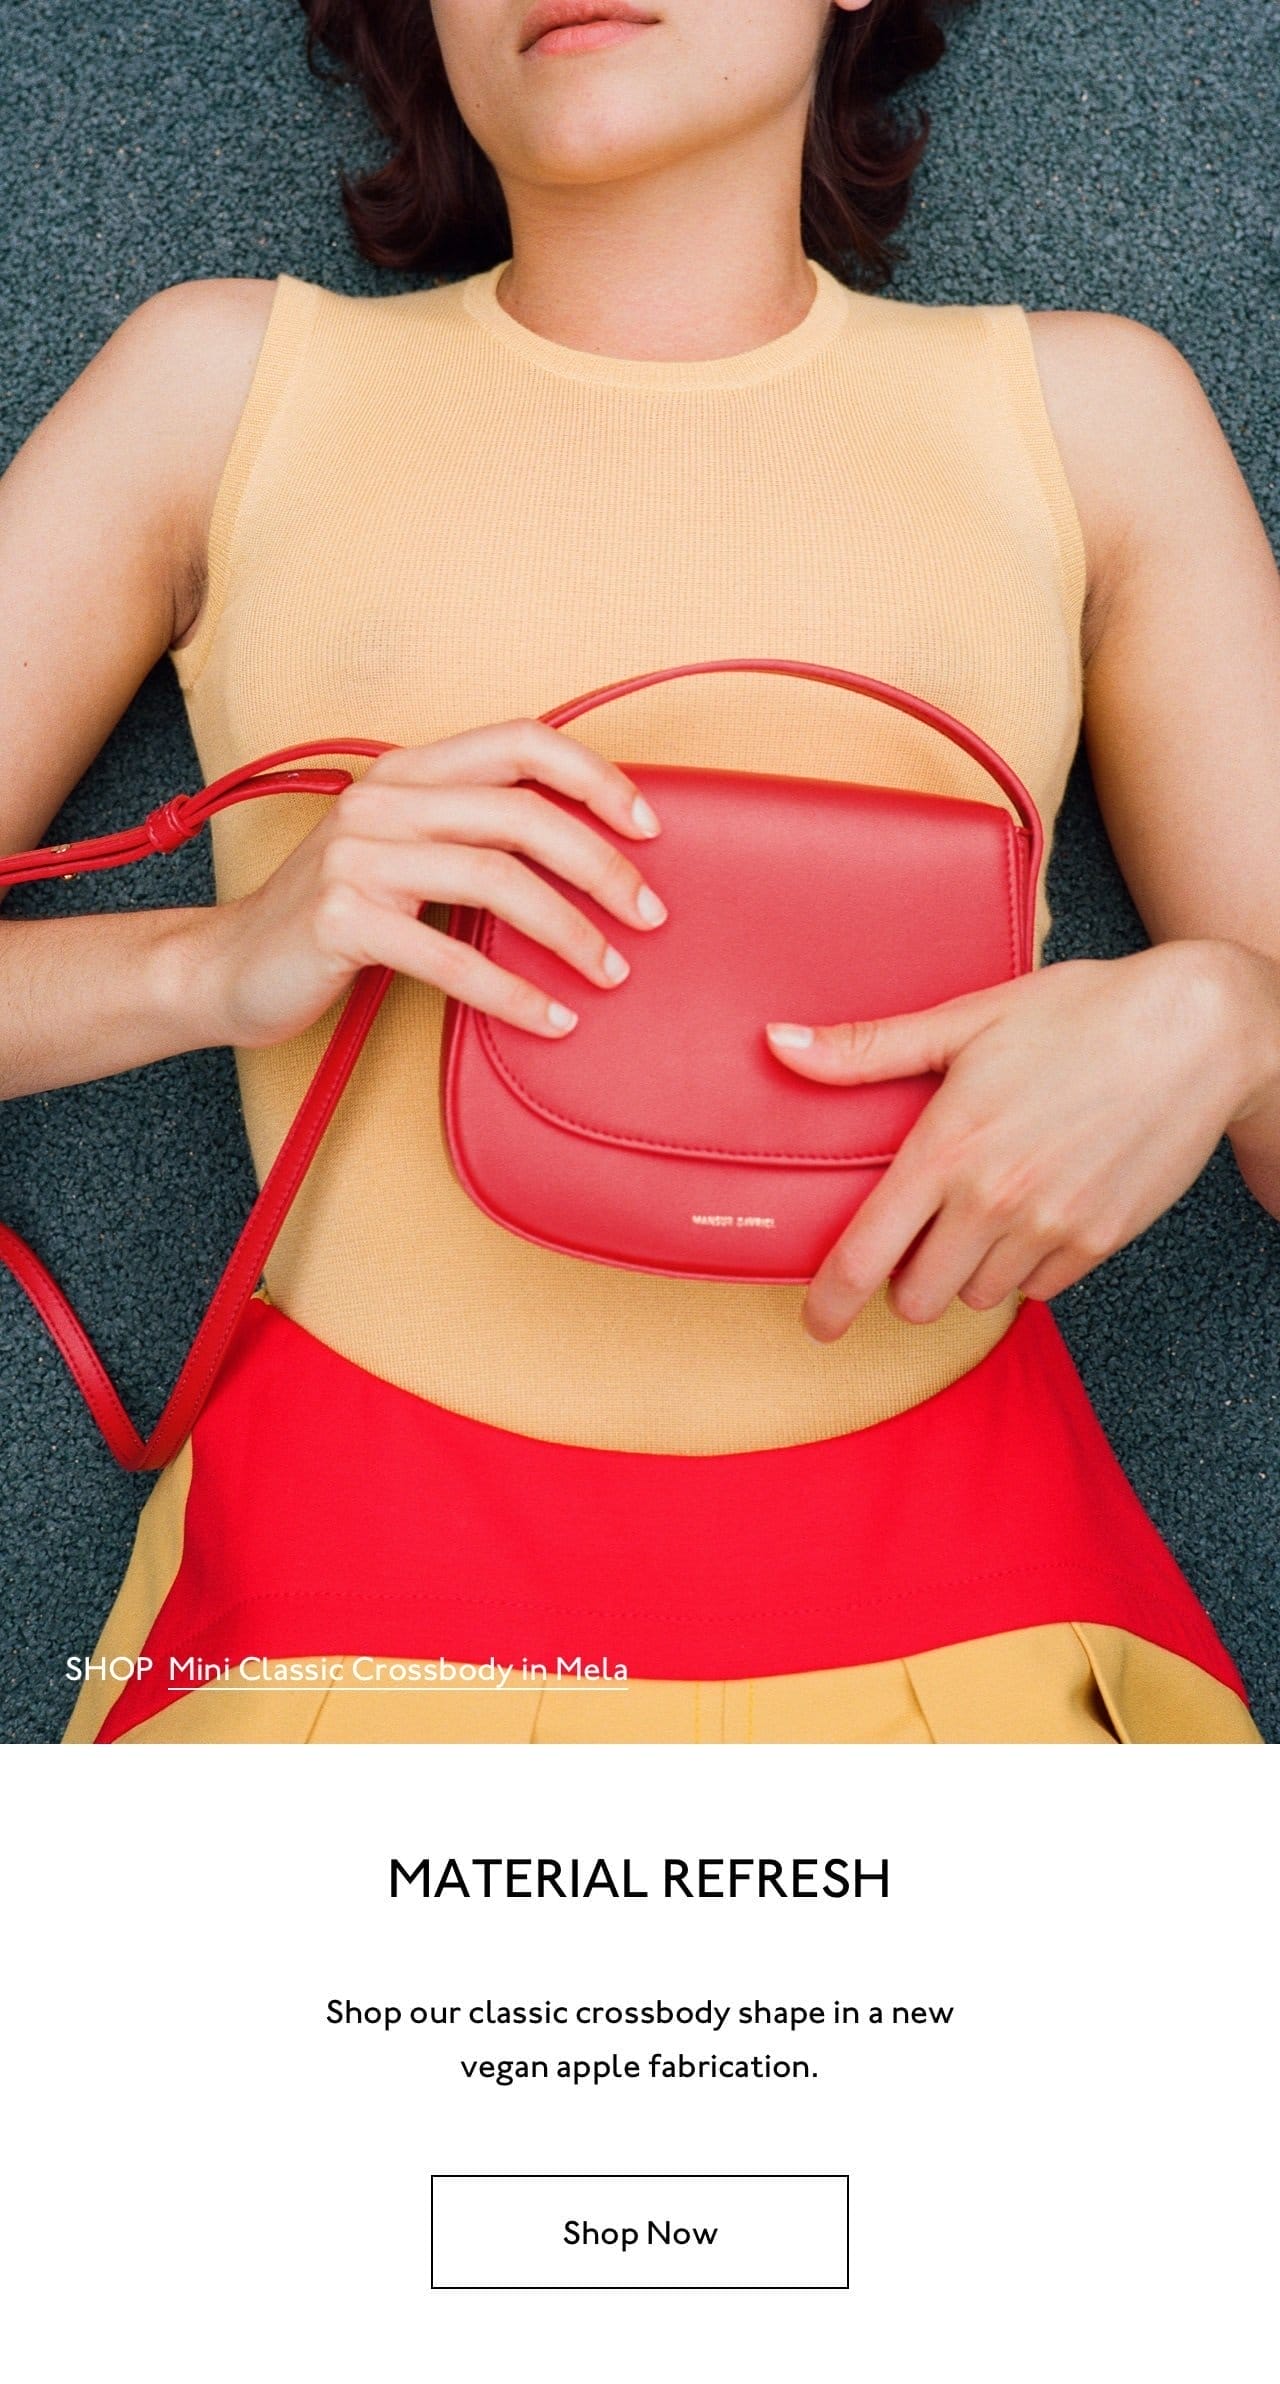 Shop our classic crossbody shape in a new vegan apple fabrication. Pictured: Mini Classic Crossbody in Mela (red).